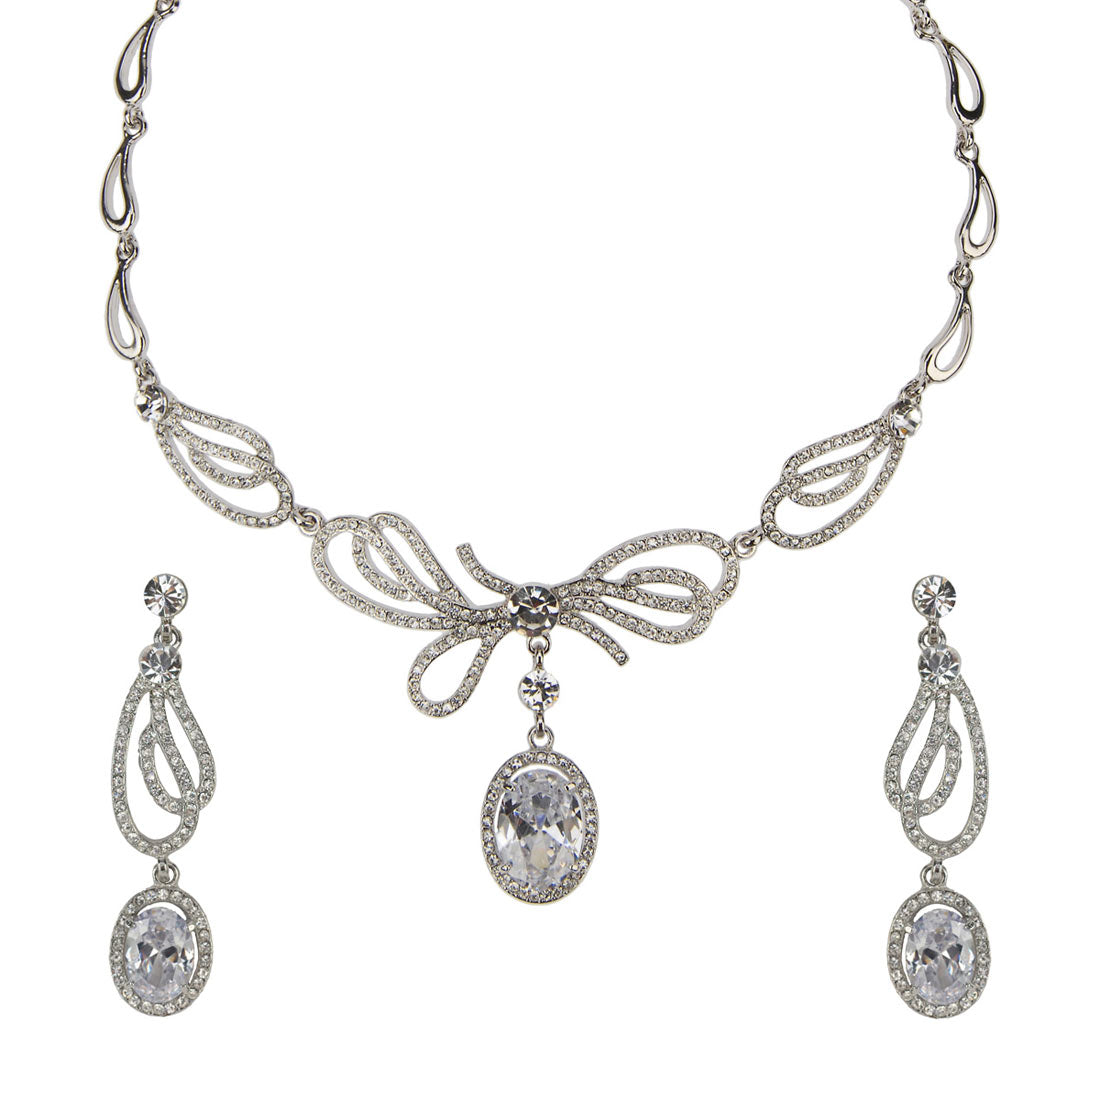 Forties Darling Drop Earrings and Necklace Jewellery Set